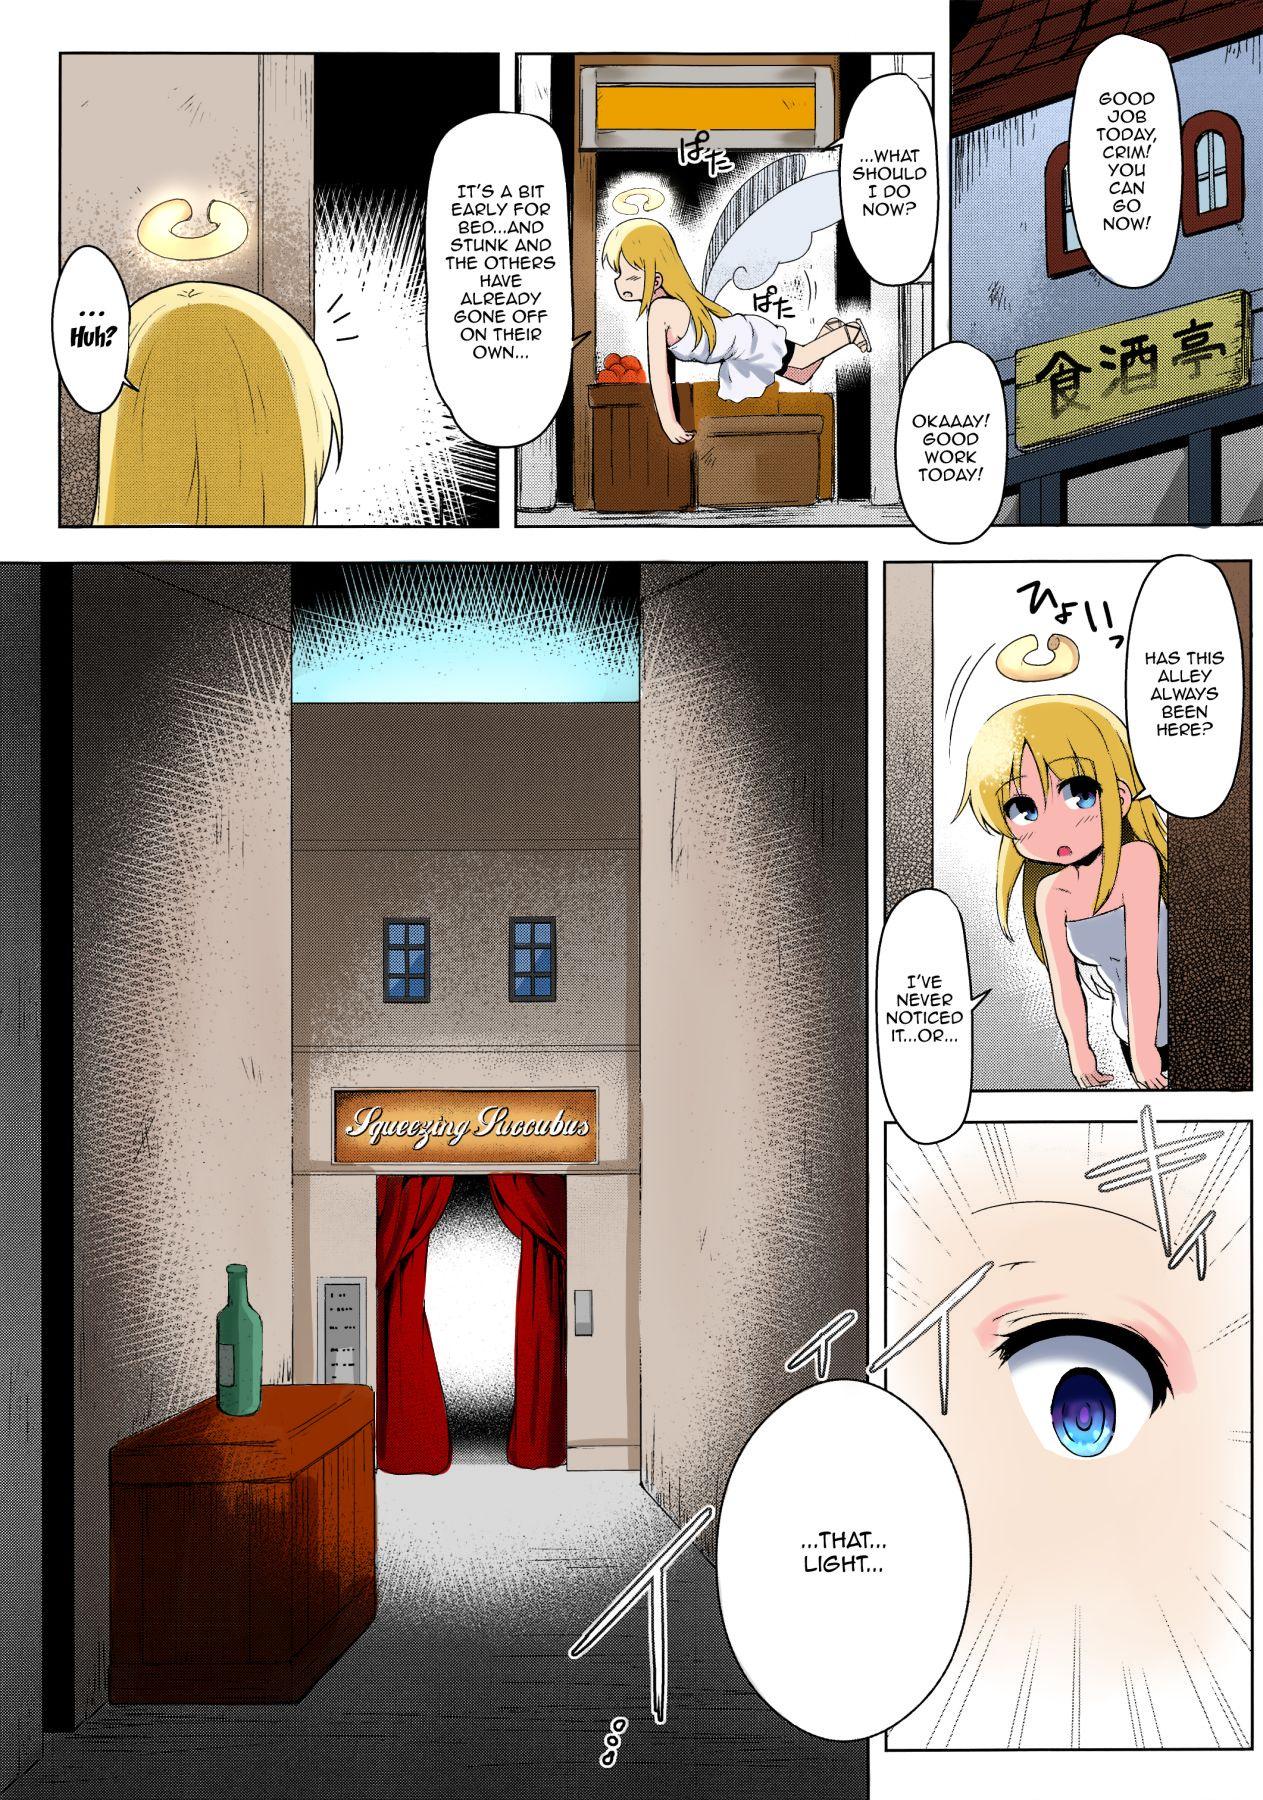 Monster [C.R's NEST (C.R)] Tenshi-Kun Reviewers | Angel-kun Reviewers (Ishuzoku Reviewers) [English] {Doujins.com} [Colorized] - Ishuzoku reviewers Ink - Page 2